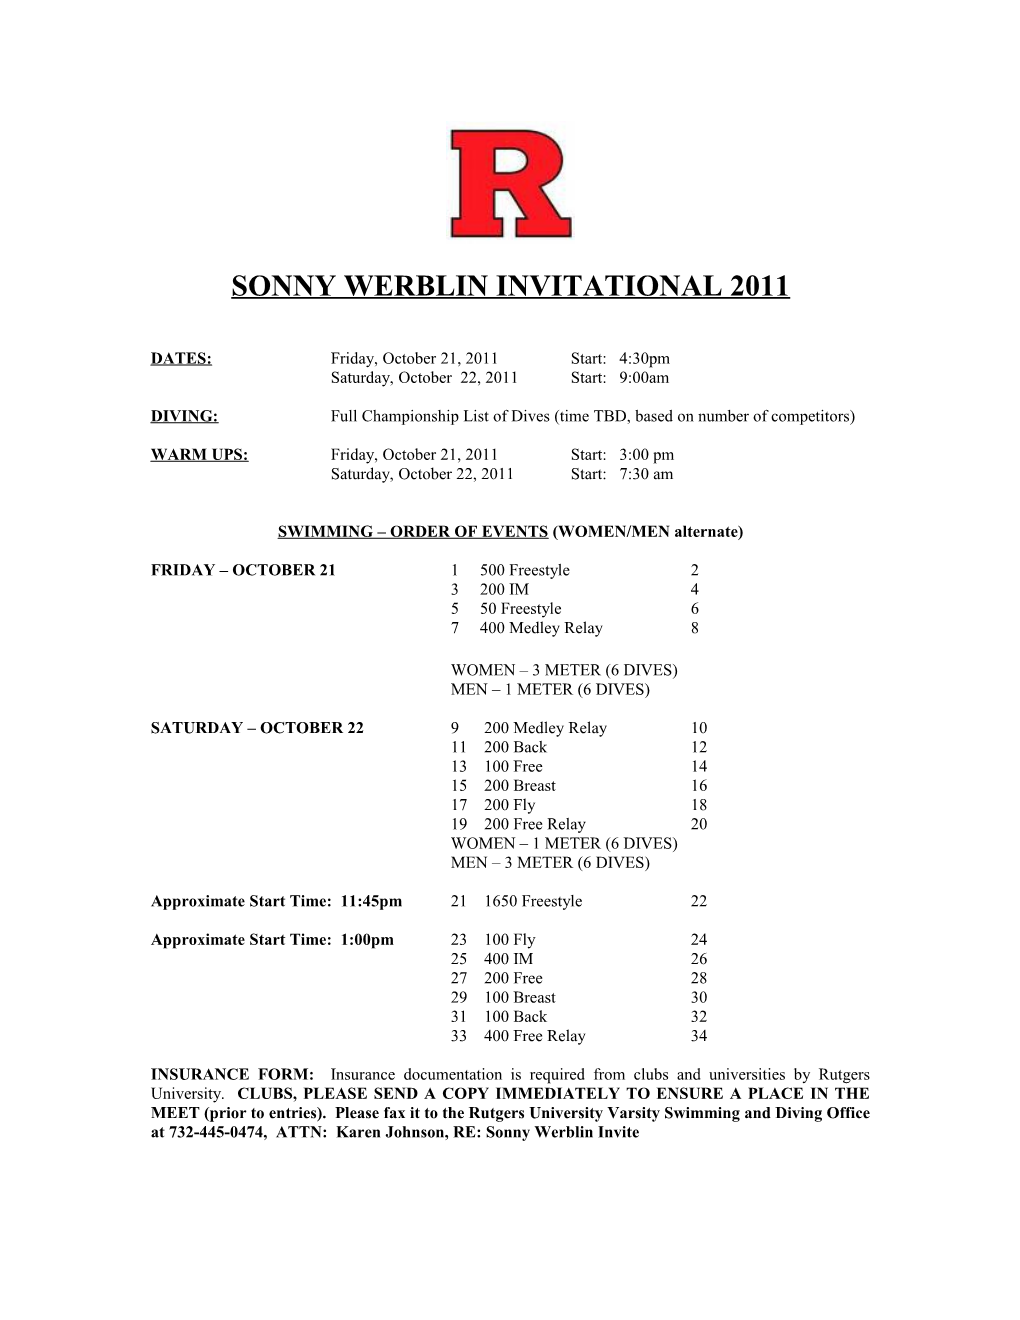 Rutgers Swimming and Diving